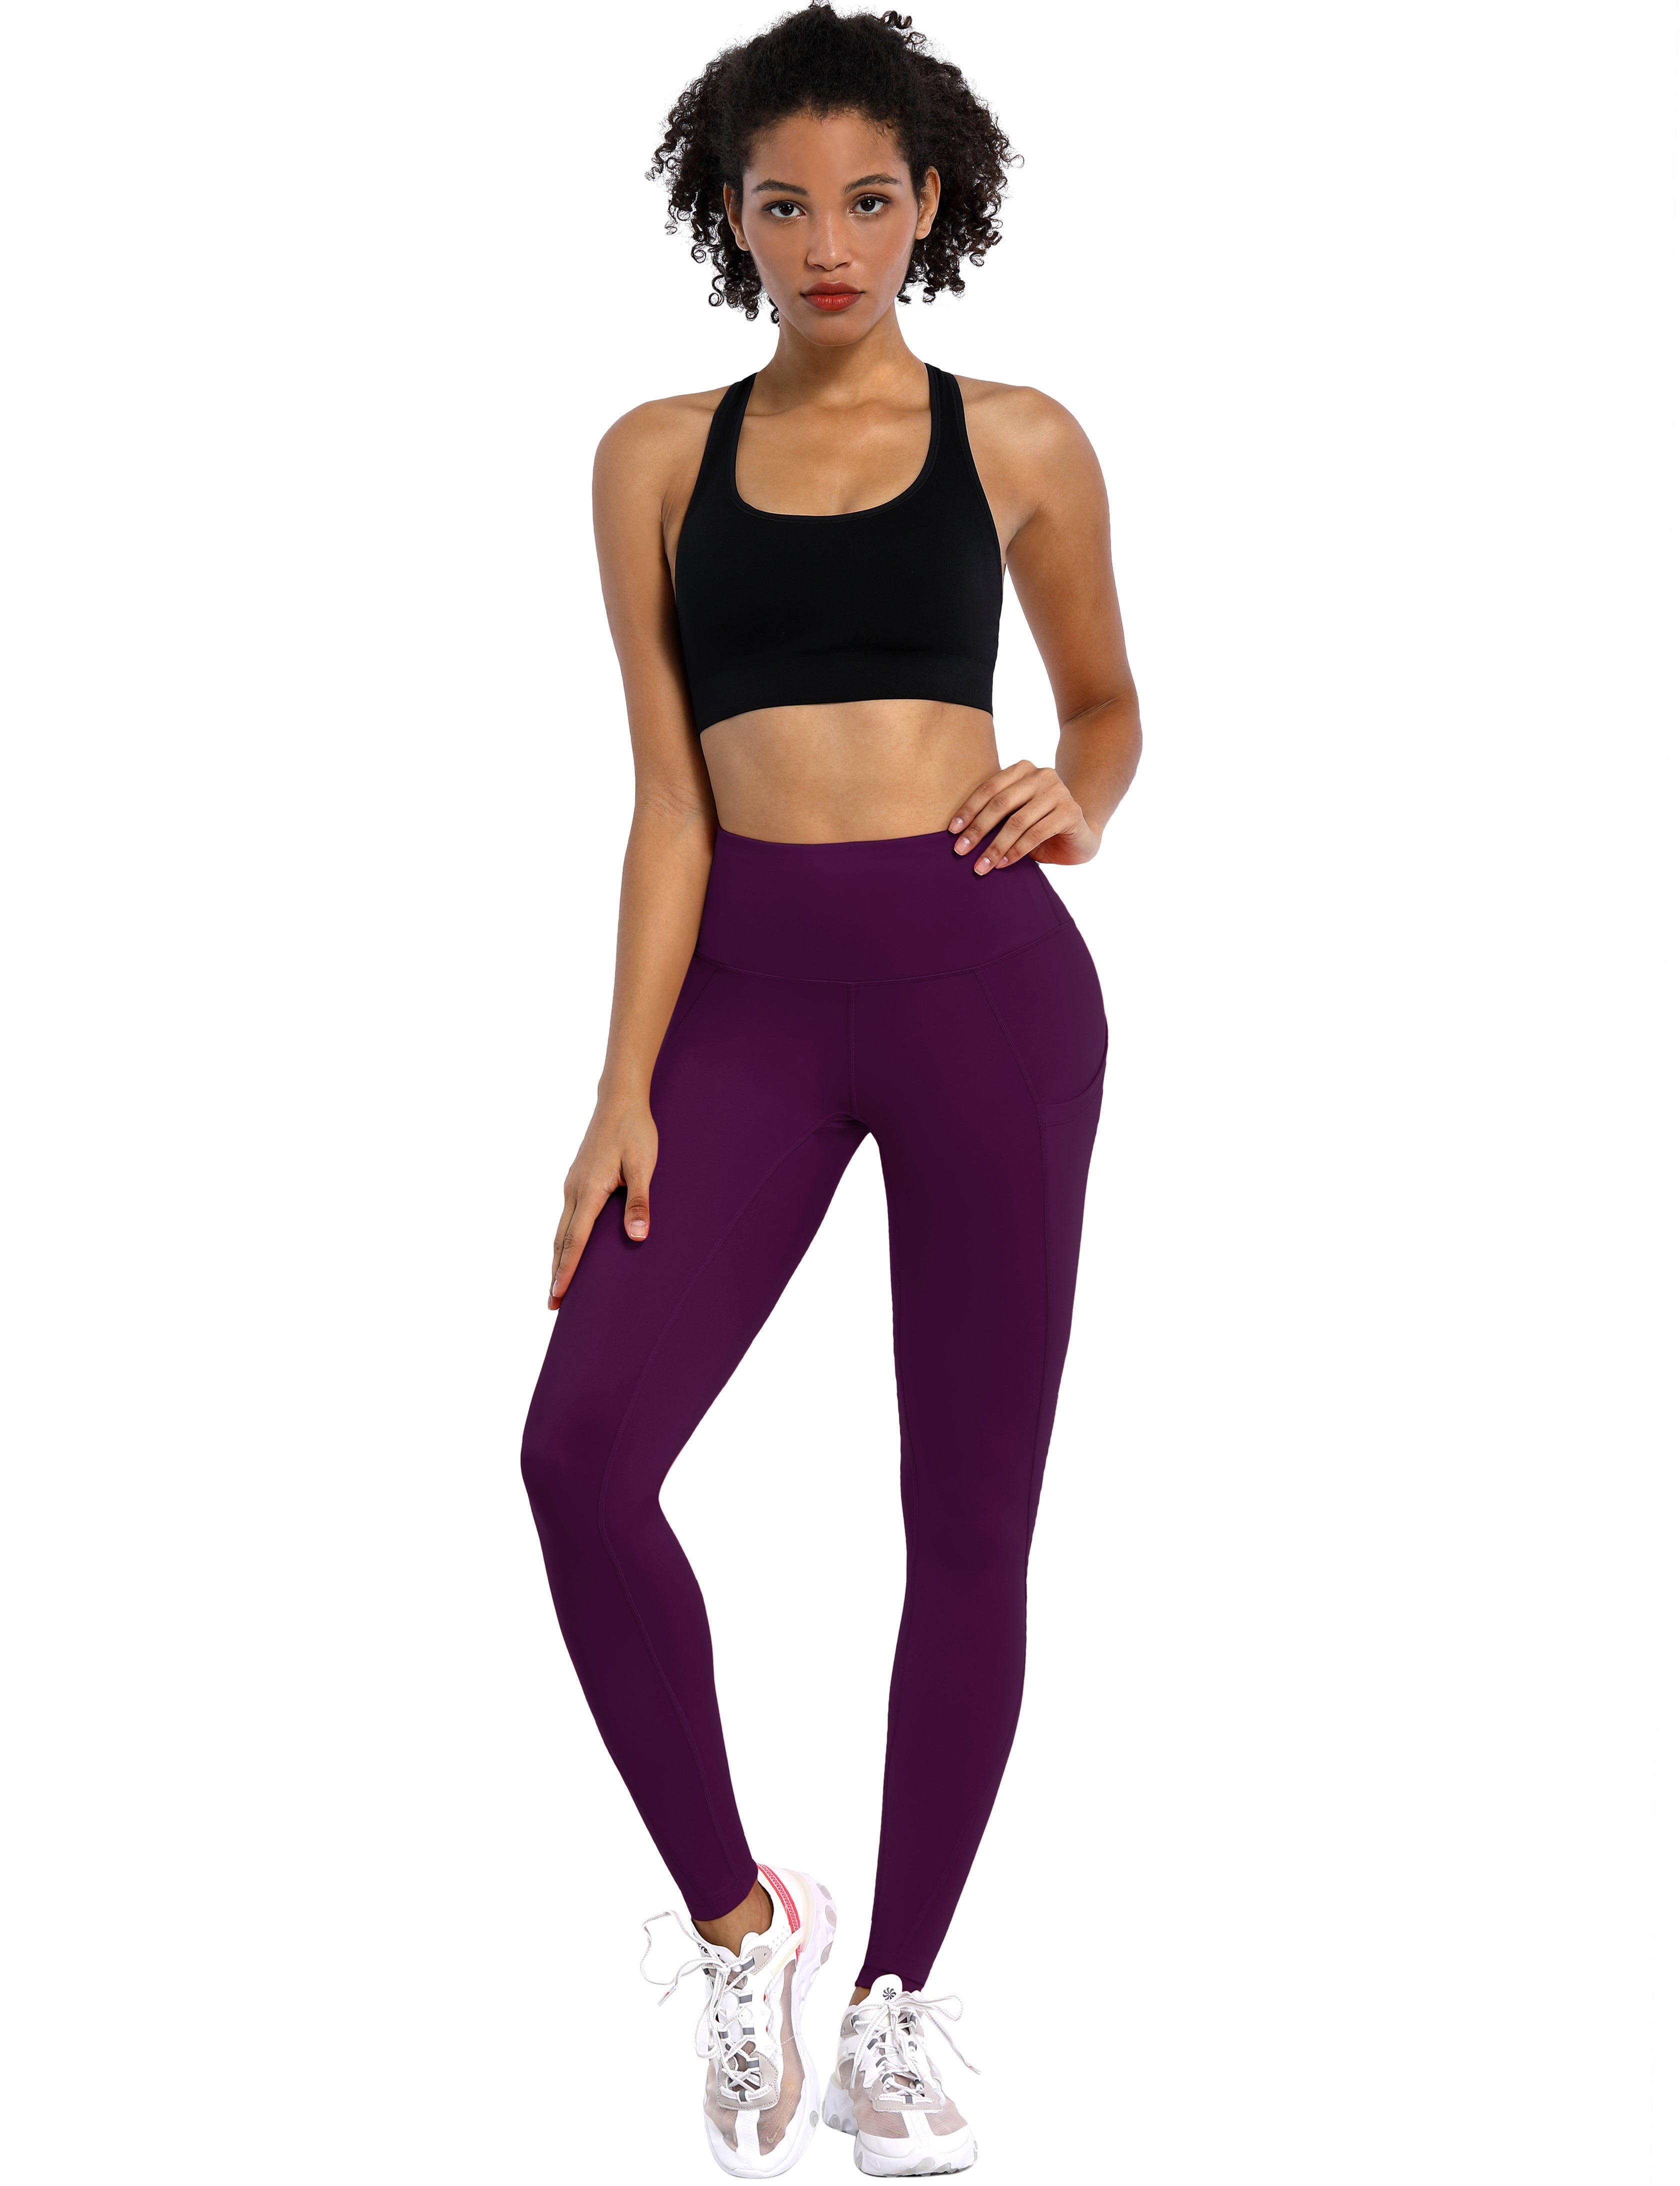 High Waist Side Pockets Gym Pants plum 75% Nylon, 25% Spandex Fabric doesn't attract lint easily 4-way stretch No see-through Moisture-wicking Tummy control Inner pocket